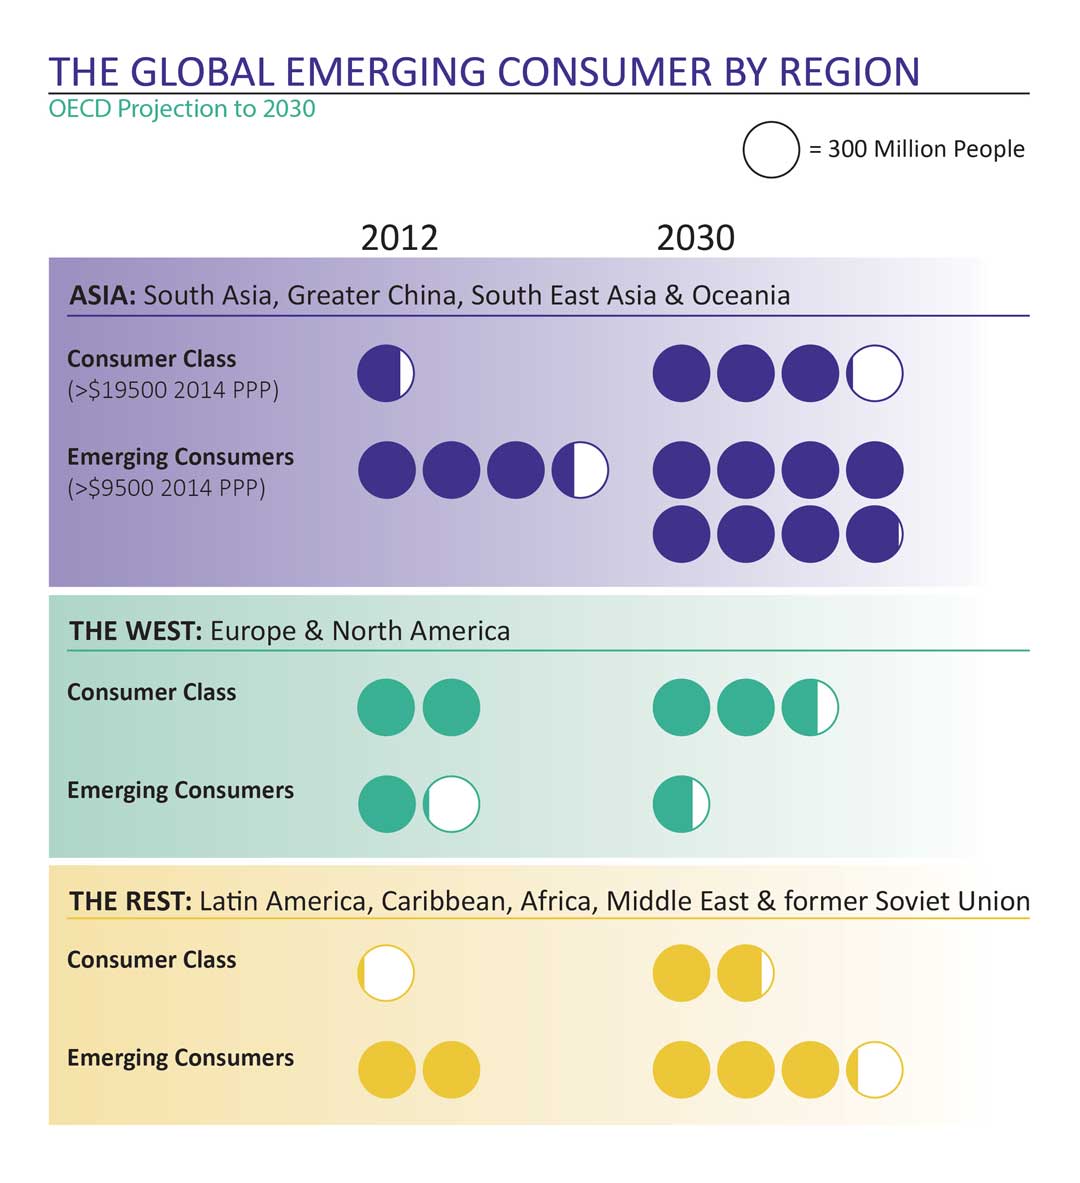 The Global Emerging Consumer by Region